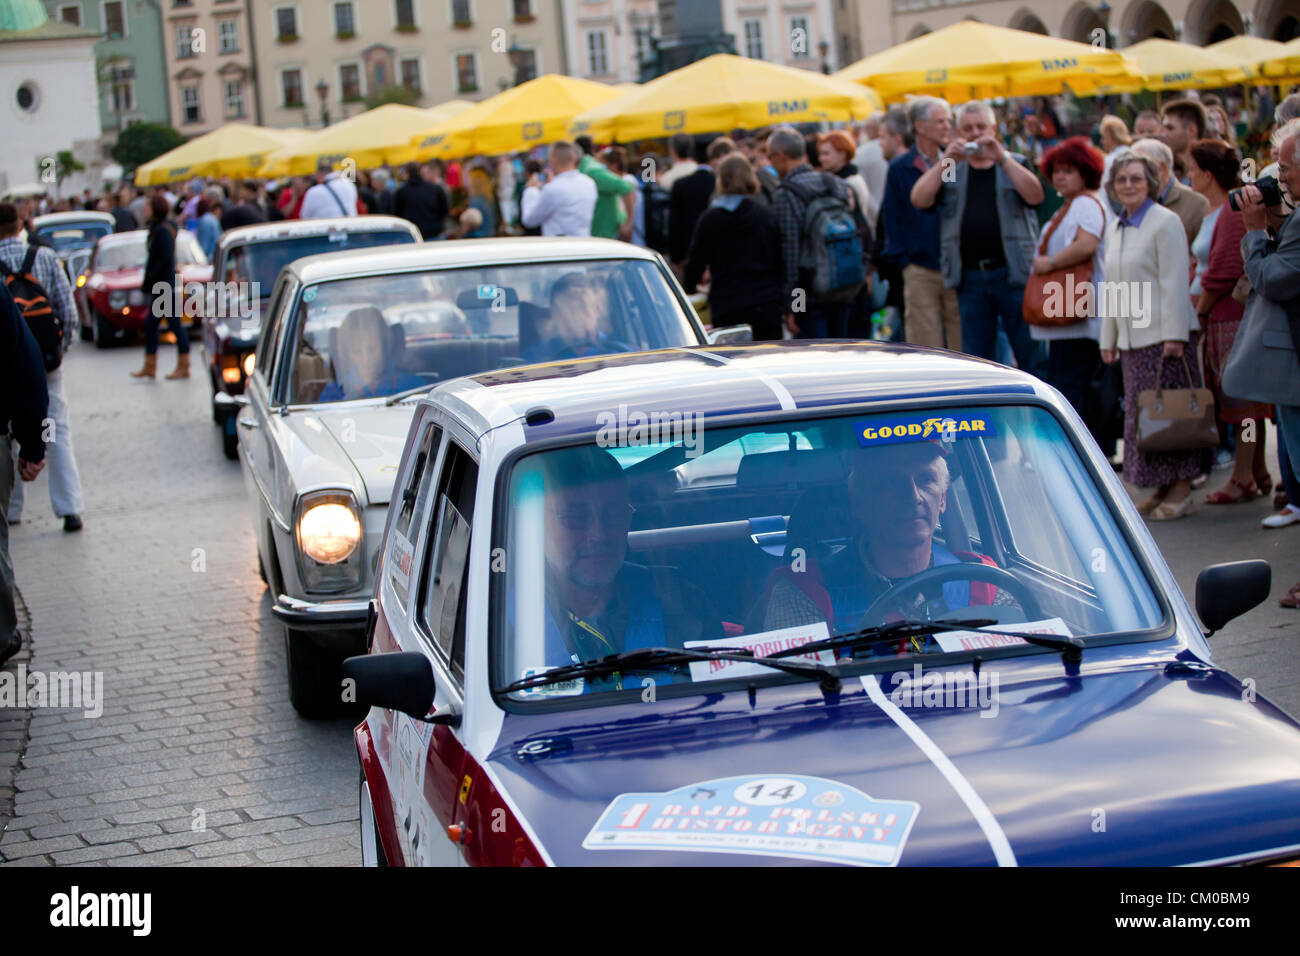 September 07, 2012. Cracow, Poland - Start of the 1st Historic Rally Poland. The rally refer to the tradition of Poland Rally and its formula to Rallye Monte Carlo Historique. Rally Poland is the second oldest automobile rally in the world, after the famous Monte Carlo Rally. It is also the most prestigious and biggest event in automobile sports in Poland and Central Europe. The first edition of the rally took place in 1921. Today, for the first time its historical edition has been started. Stock Photo